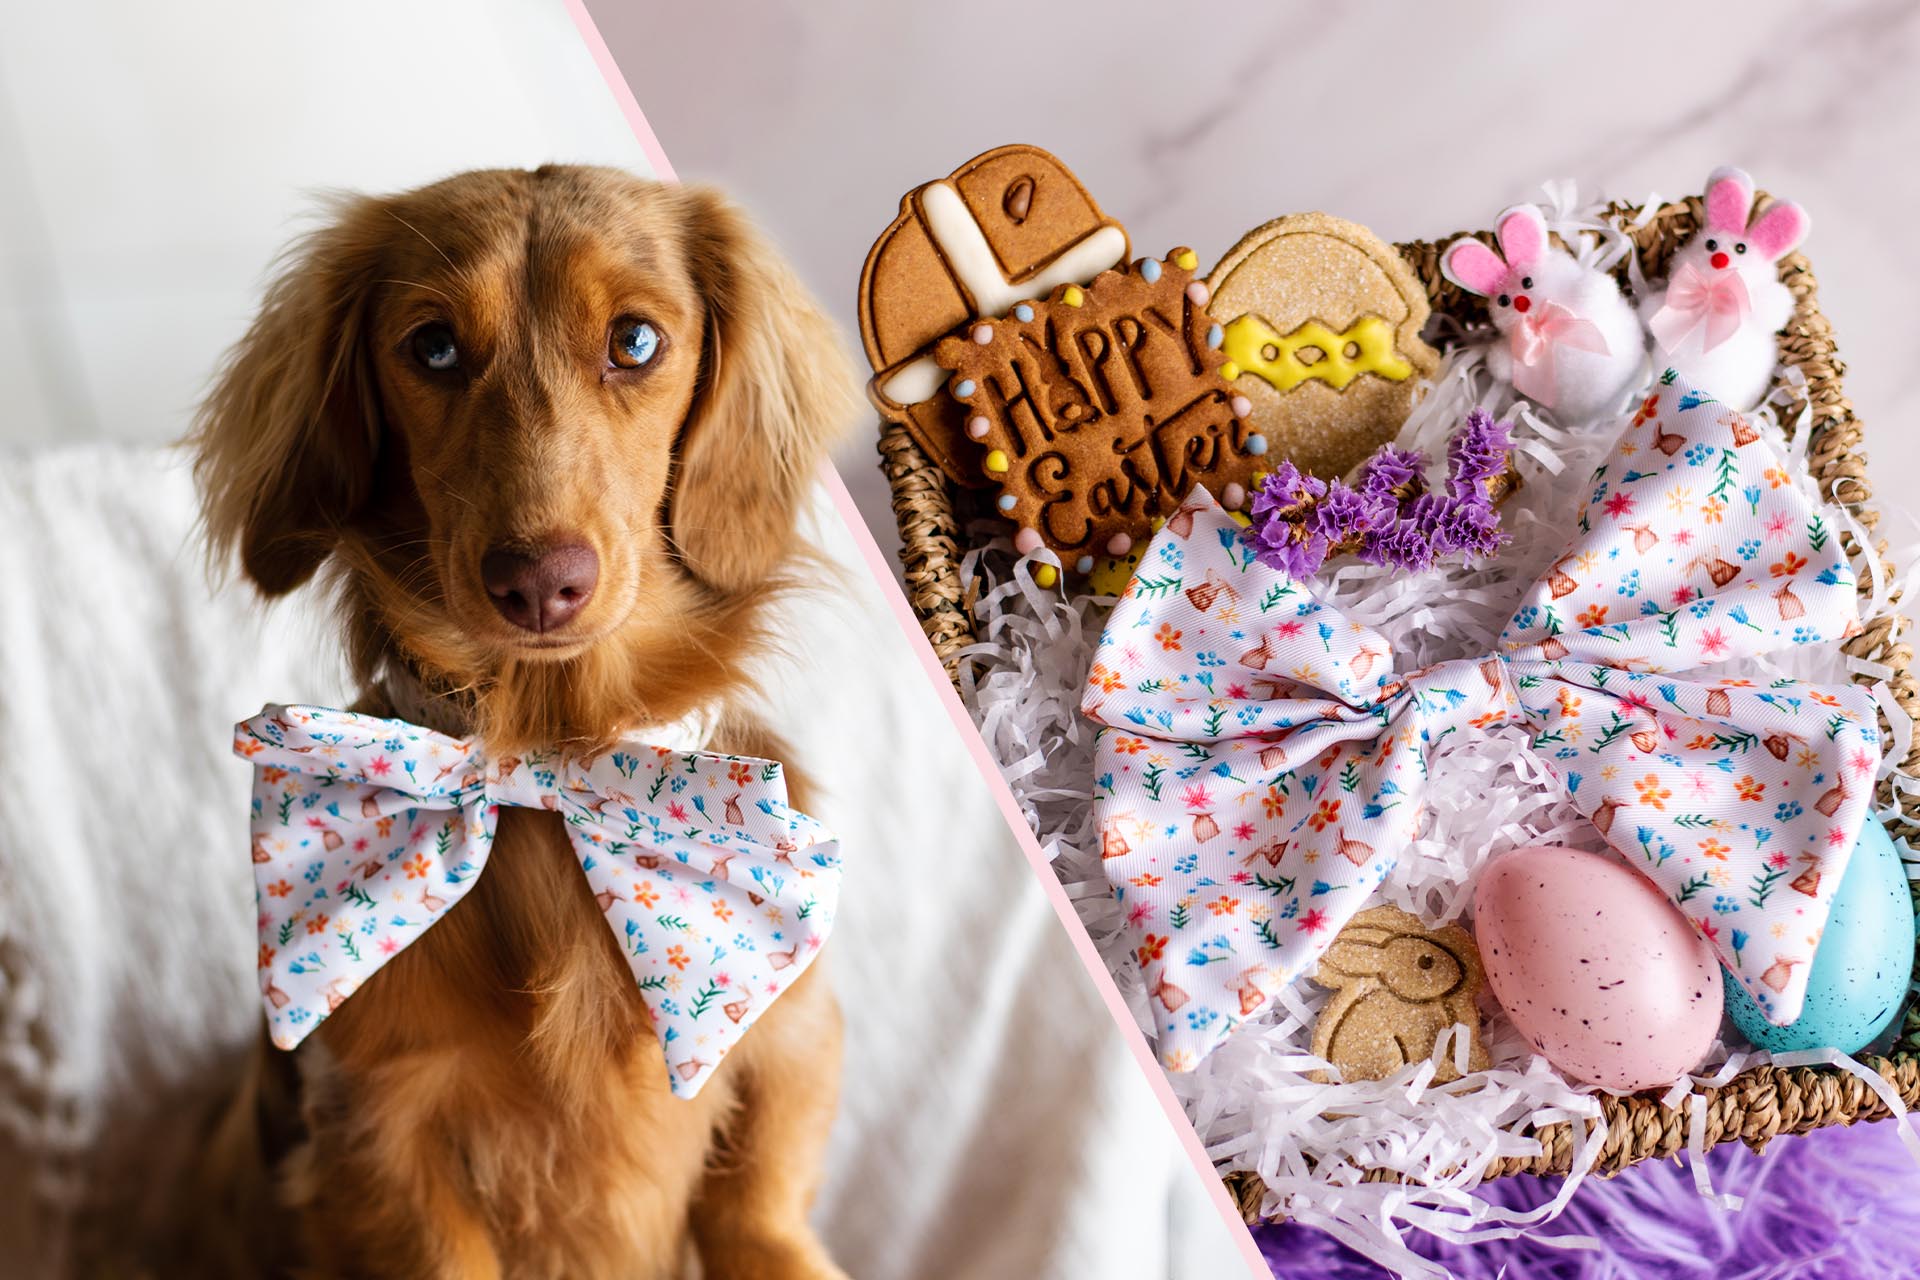 AmbassaDOG Coco next to Easter-themed dog accessories and treats.